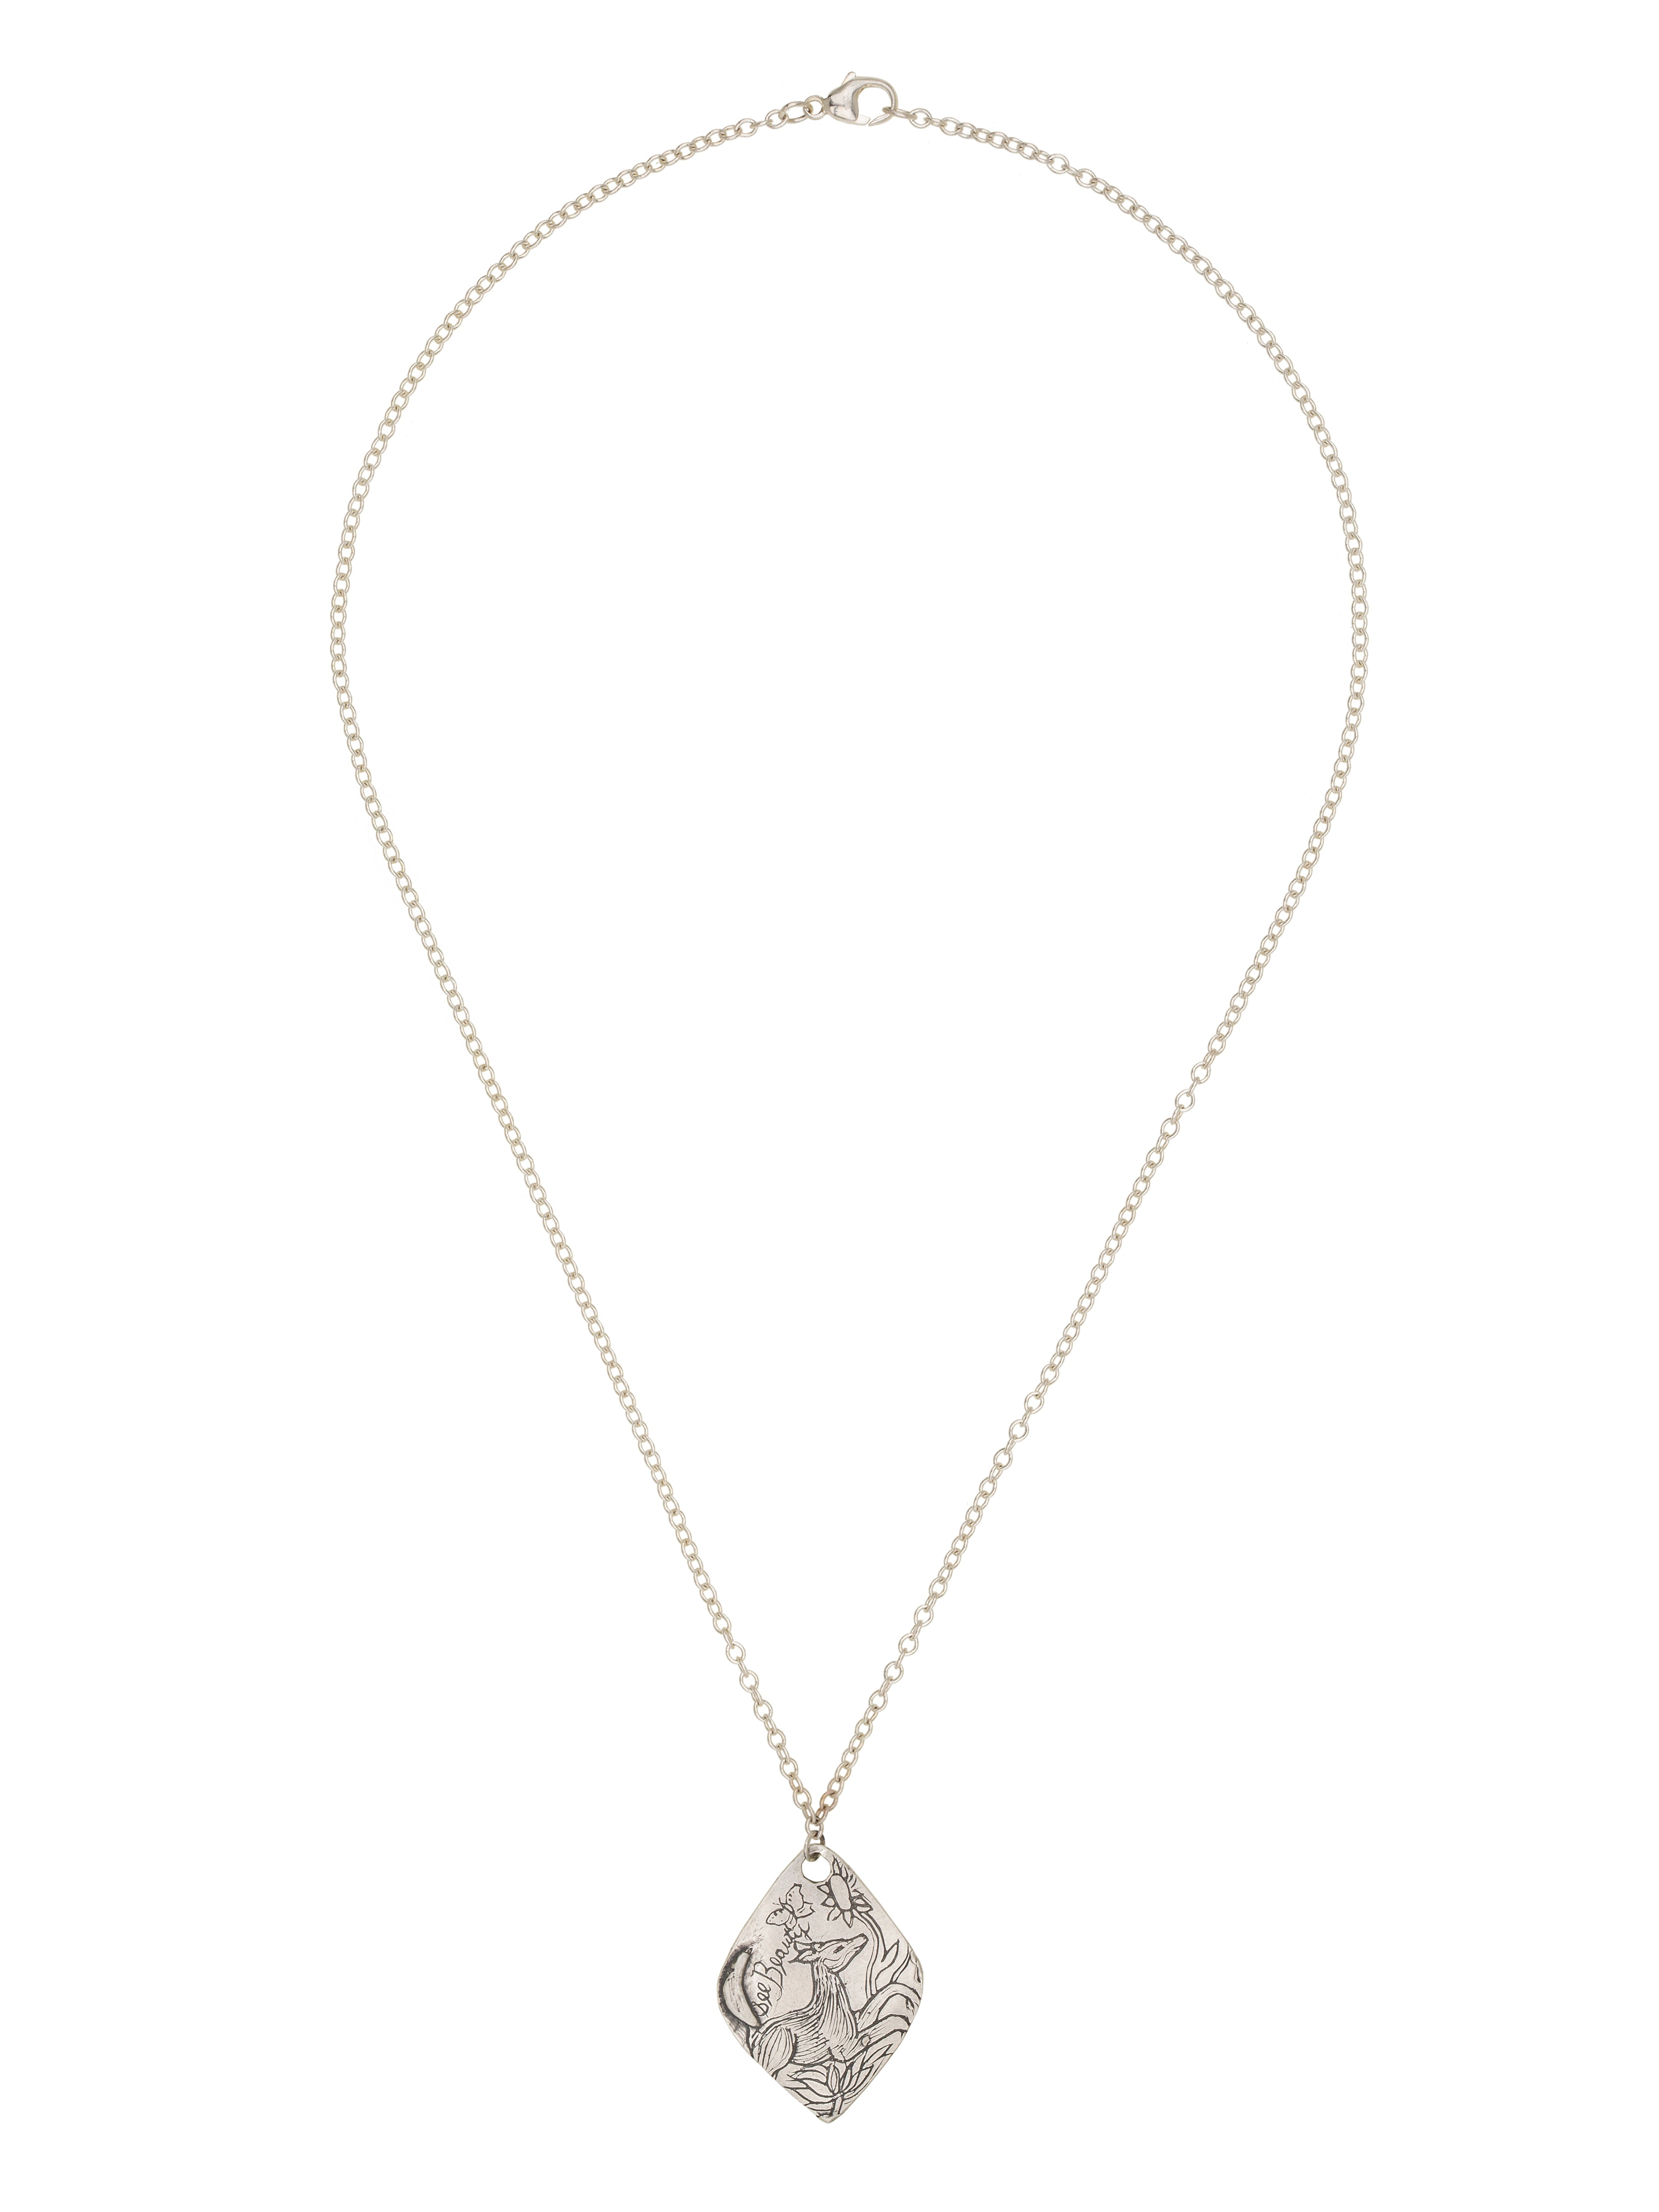 Grounded in Love Necklace